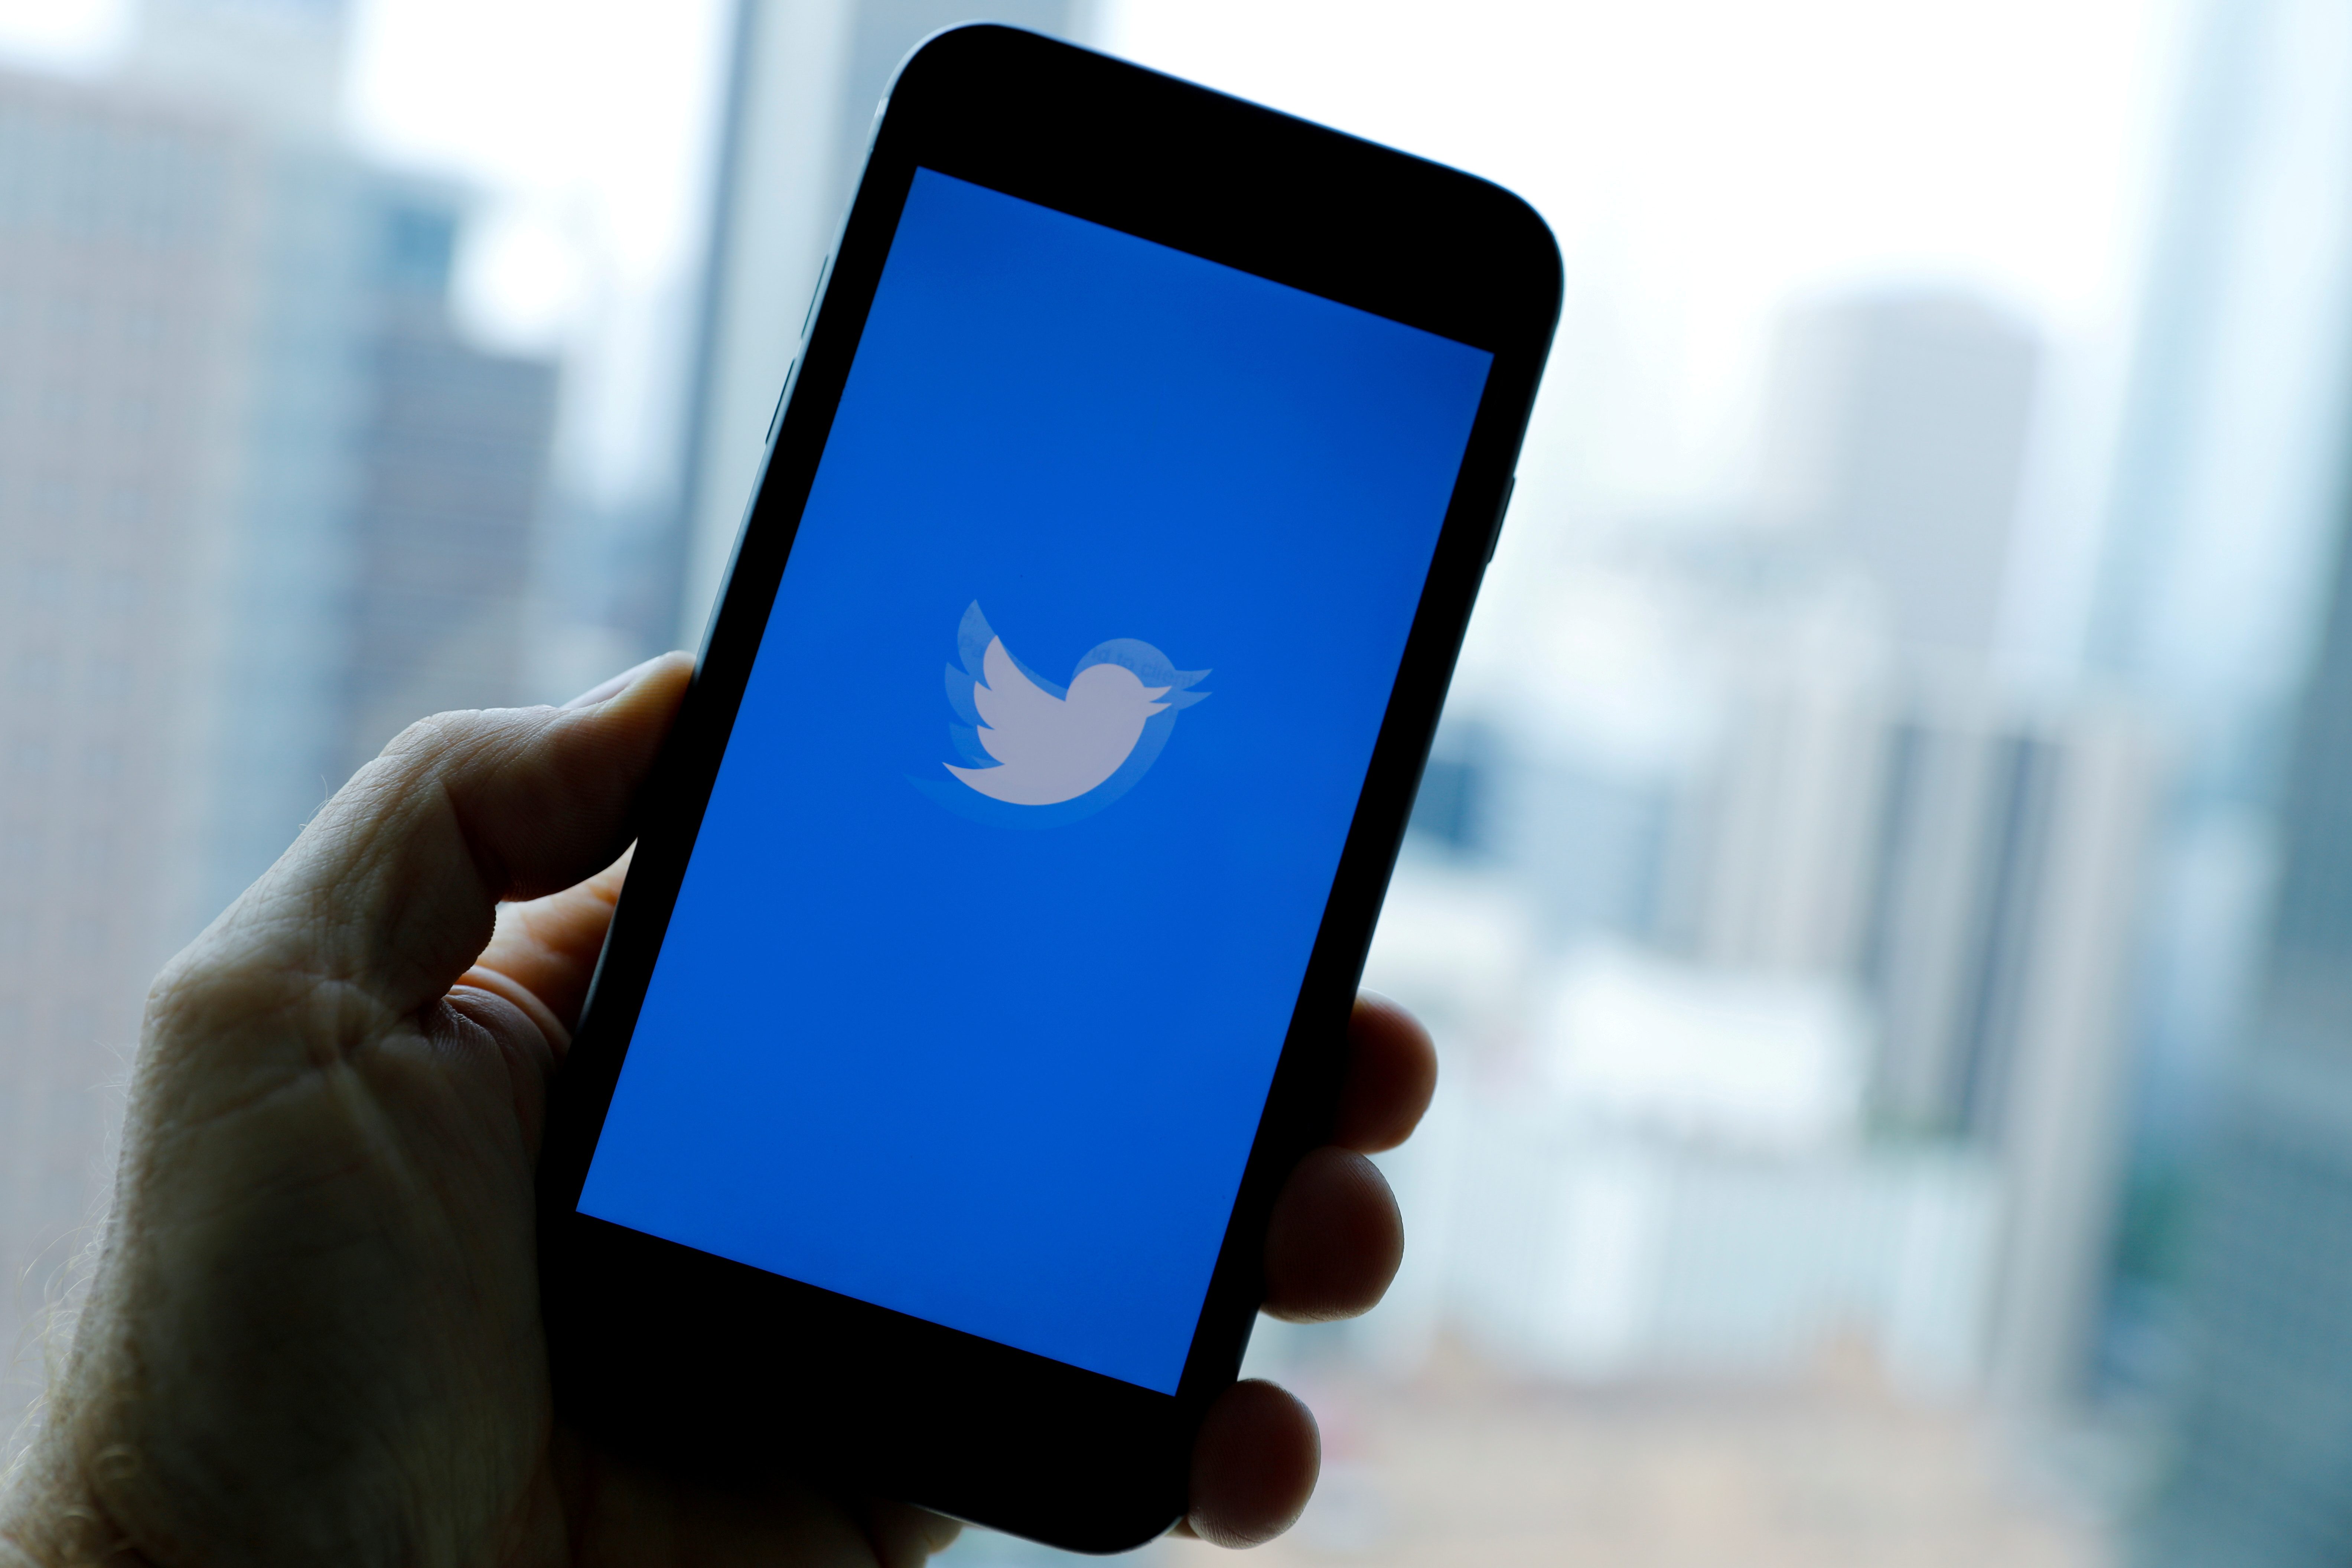 India’s IT minister slams Twitter for denying access to account